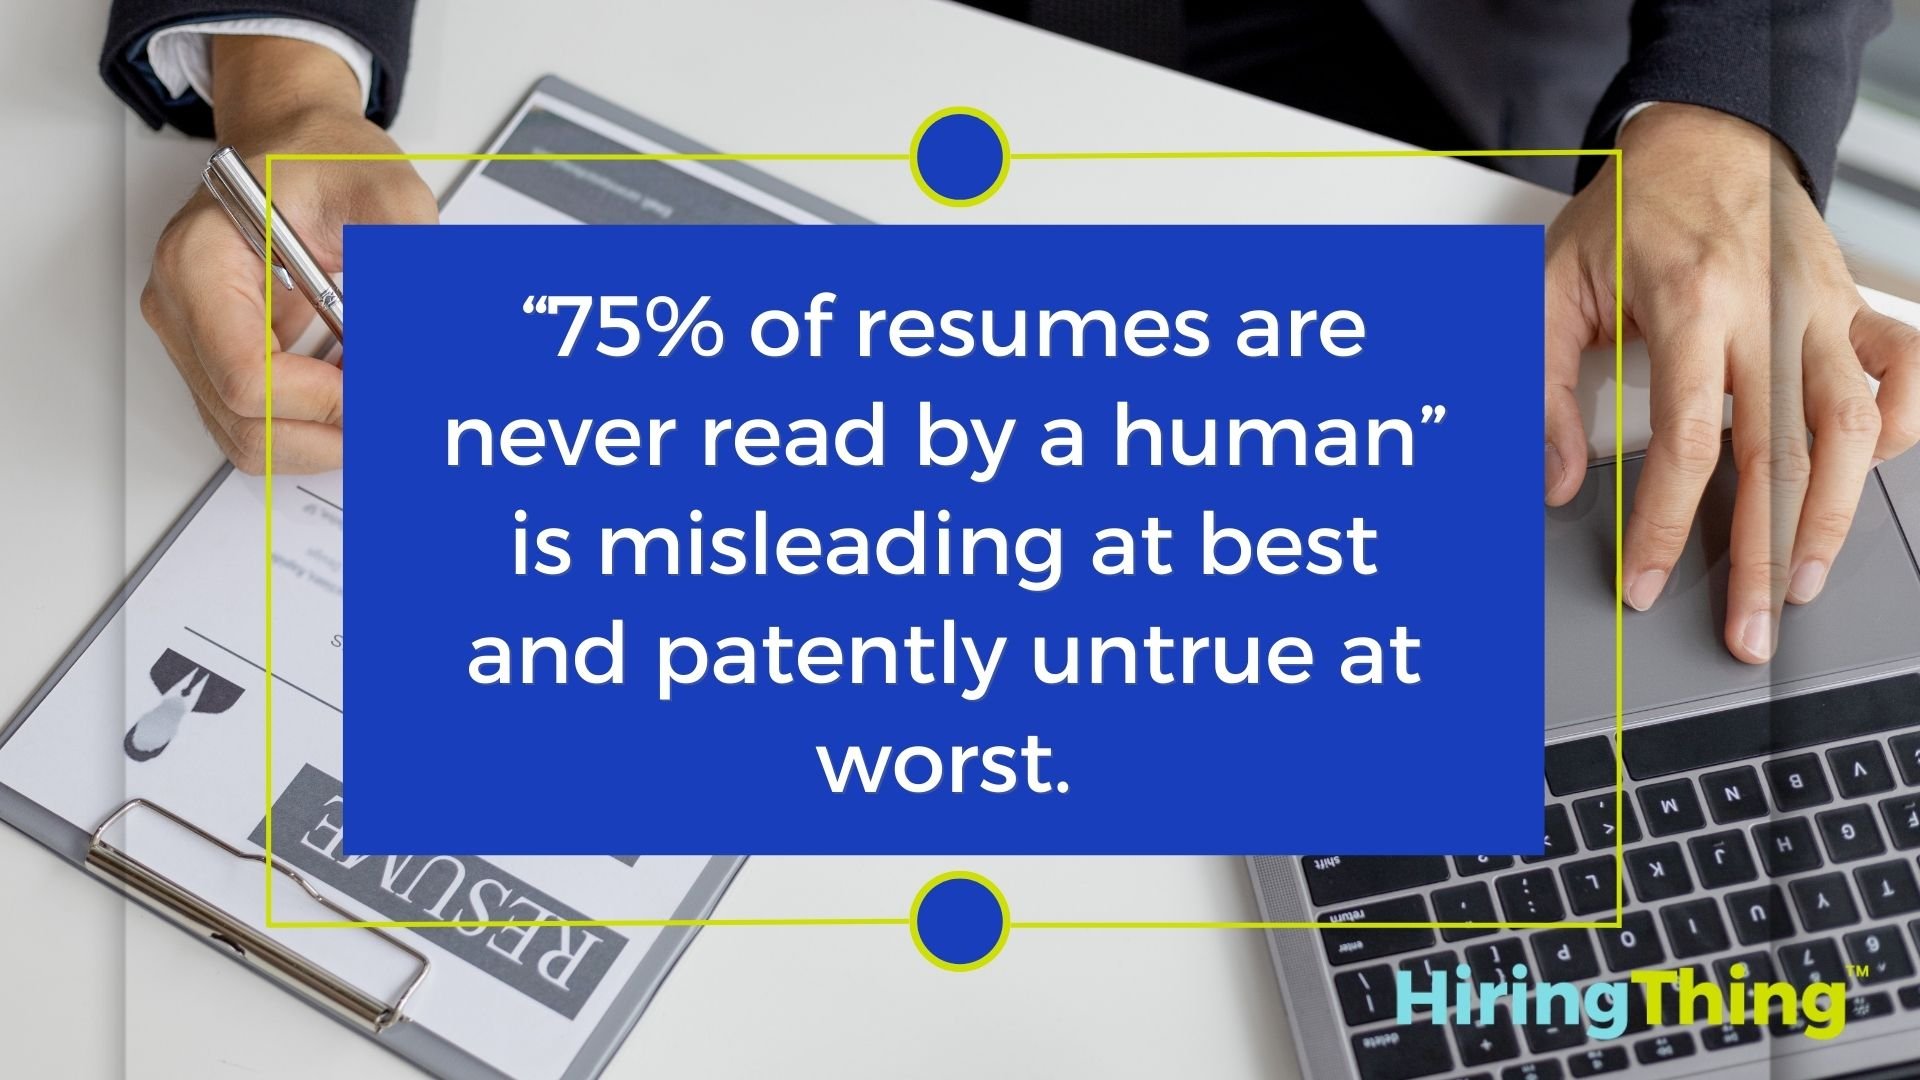 “75% of resumes are never read by a human” is misleading at best and patently untrue at worst.